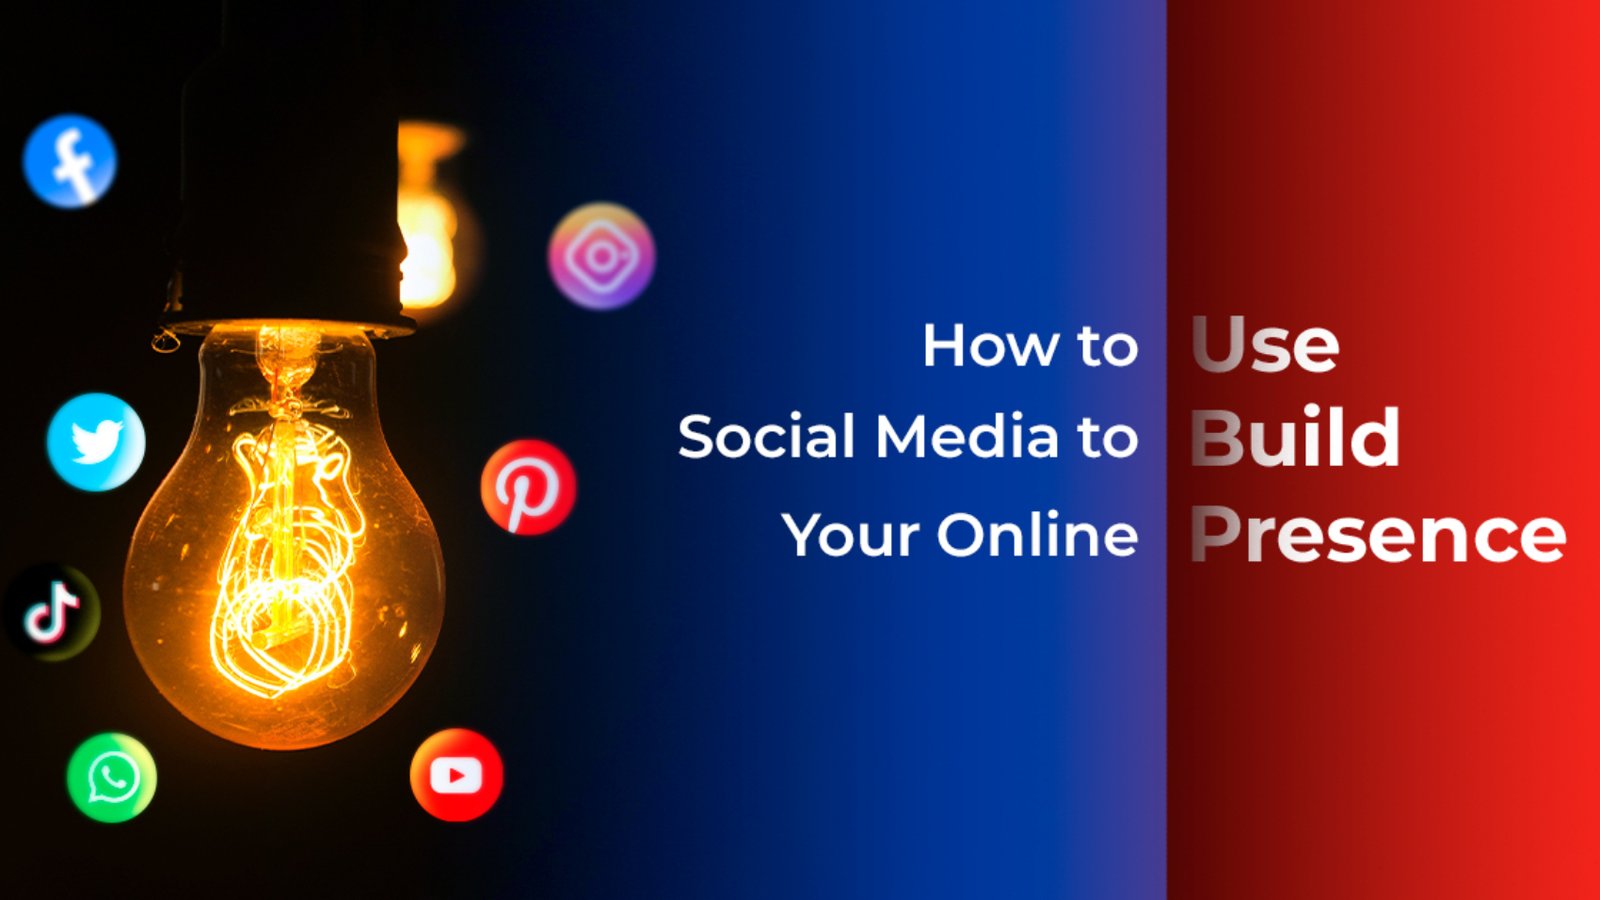 How to use social media to build your online presence